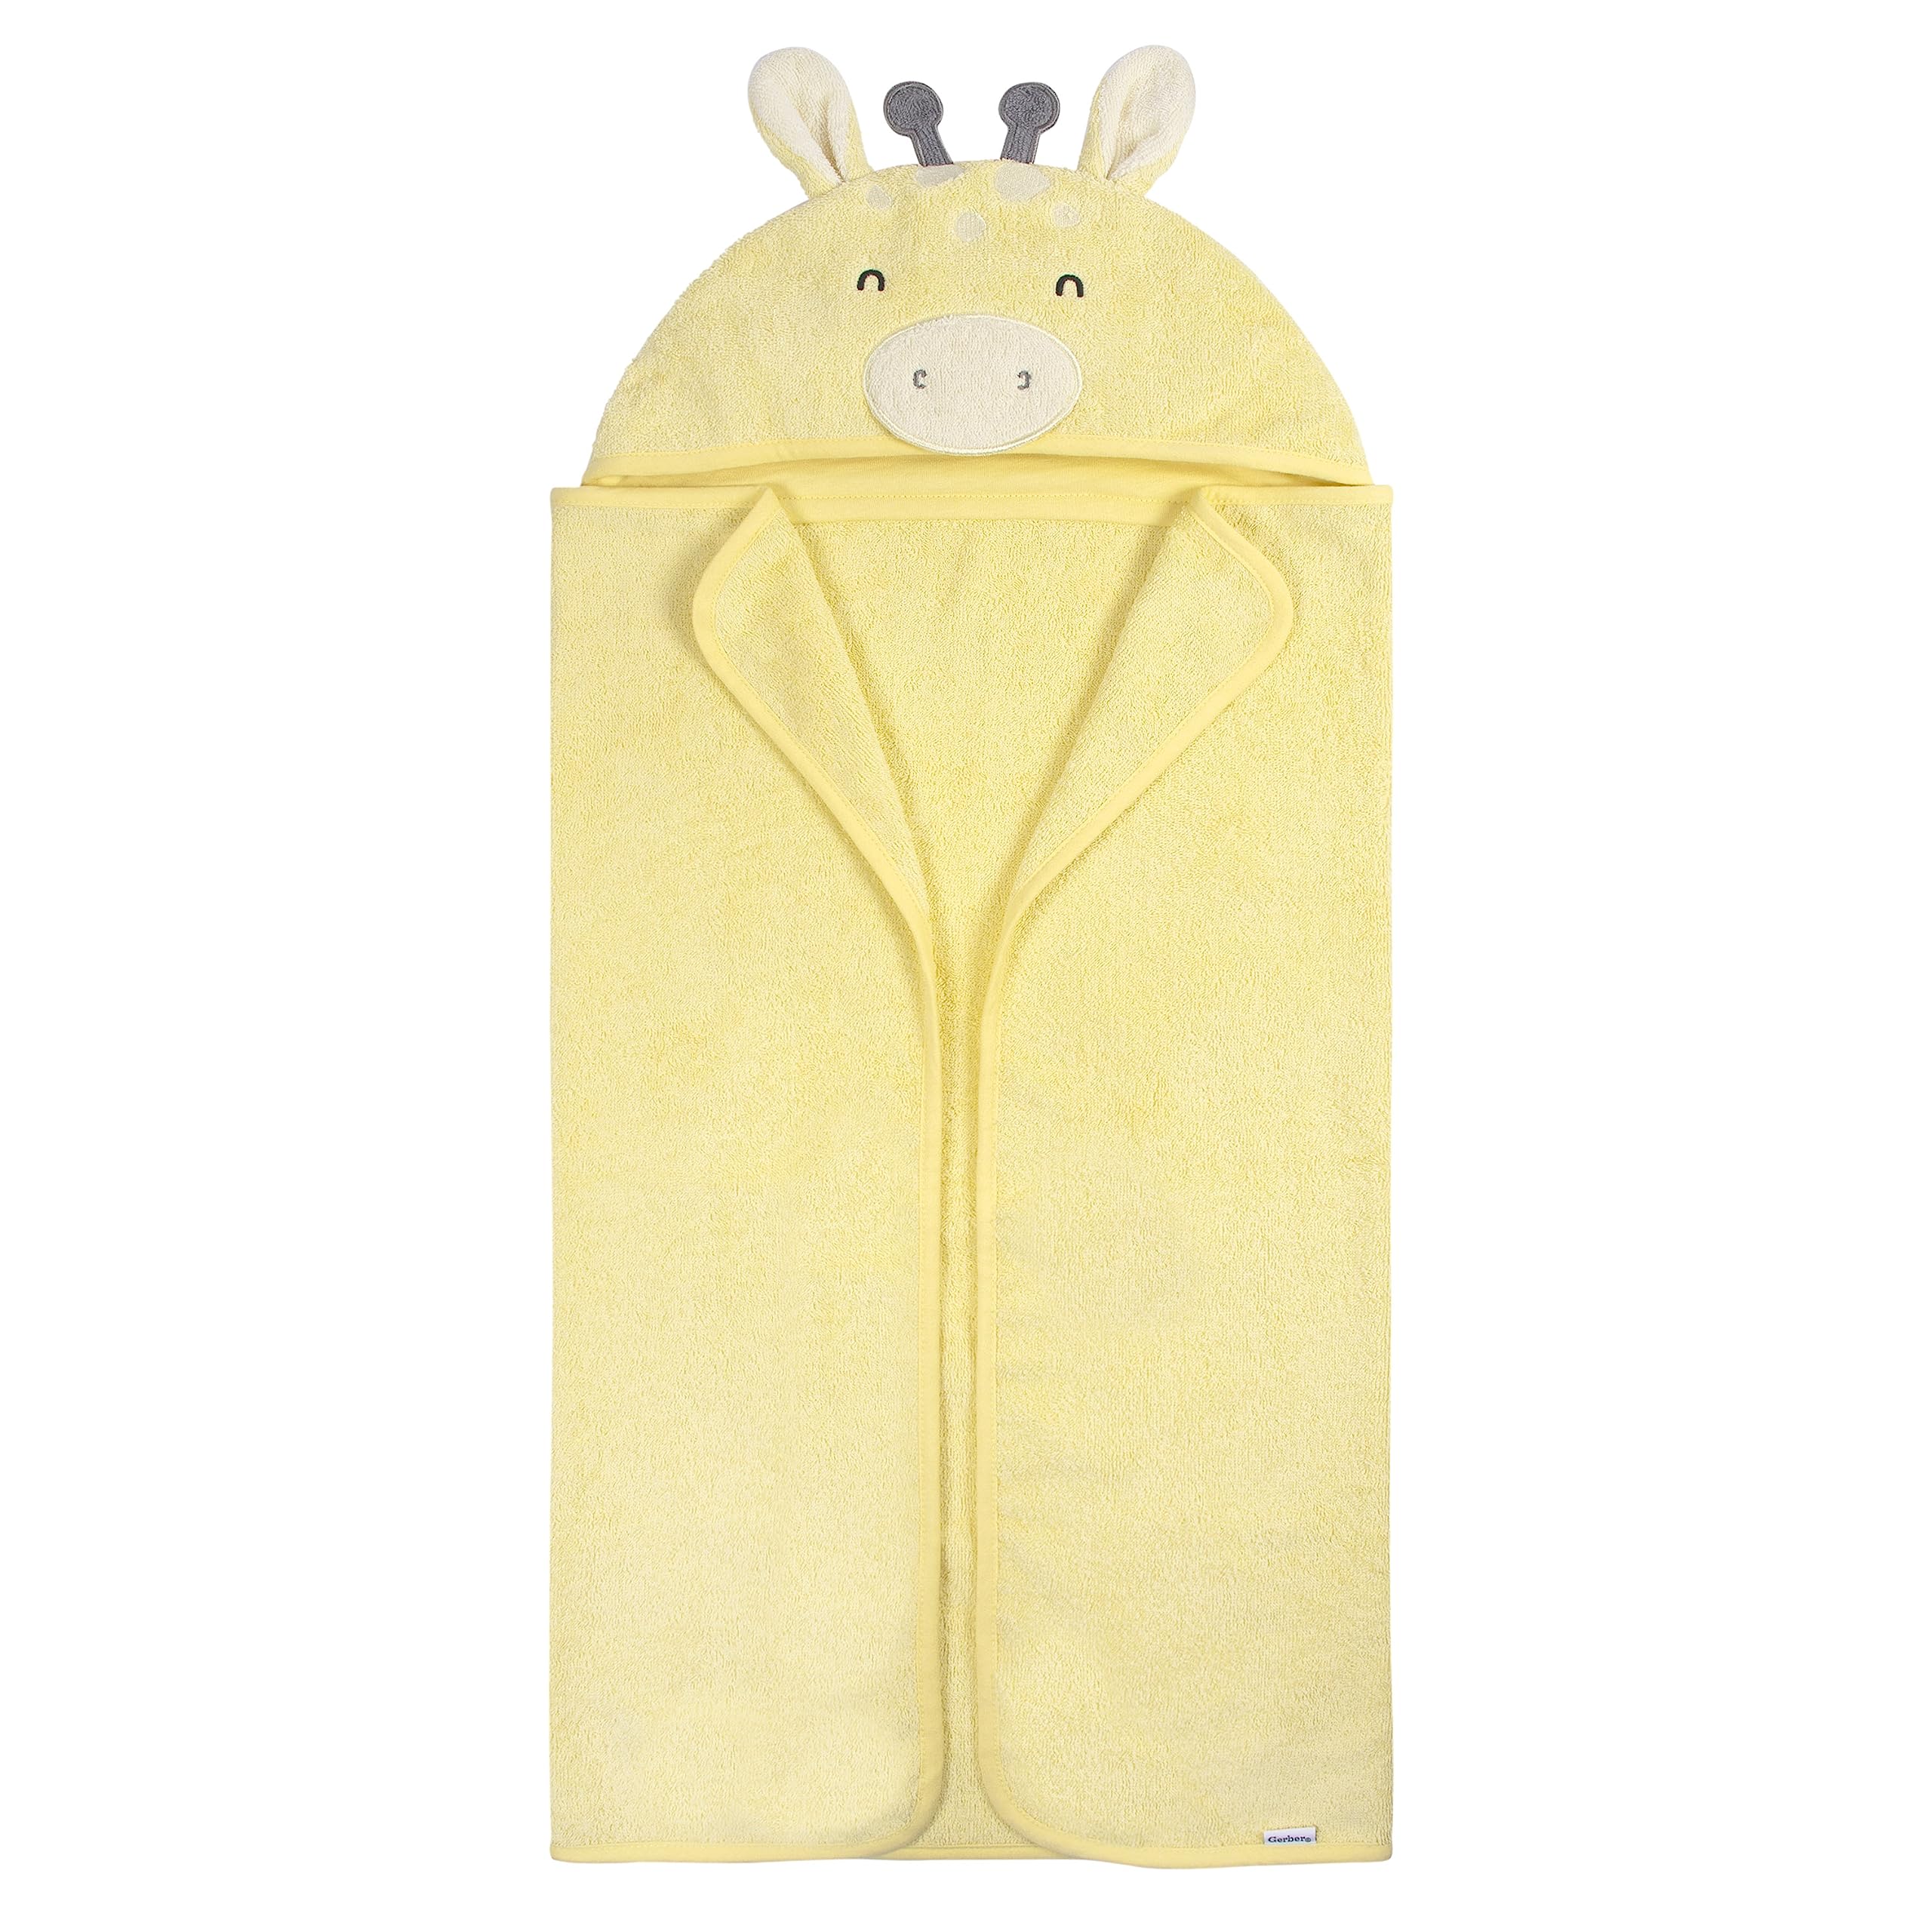 Gerber Baby 4 Piece Animal Character Hooded Towel and Washcloth Set, Yellow Giraffe, One Size